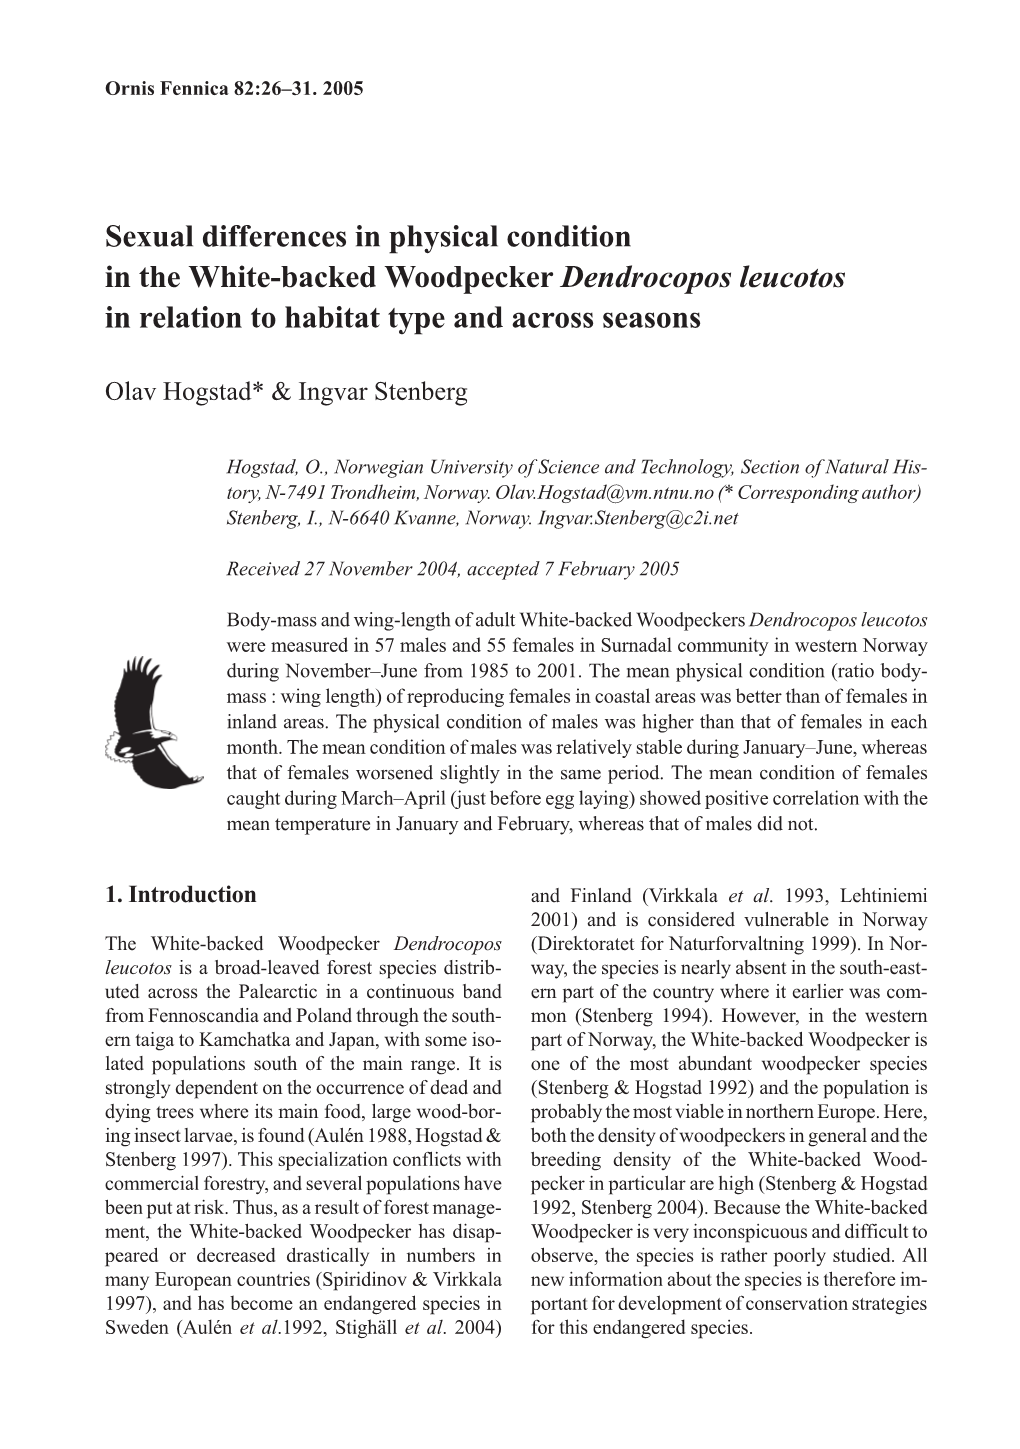 Sexual Differences in Physical Condition in the White-Backed Woodpecker Dendrocopos Leucotos in Relation to Habitat Type and Across Seasons